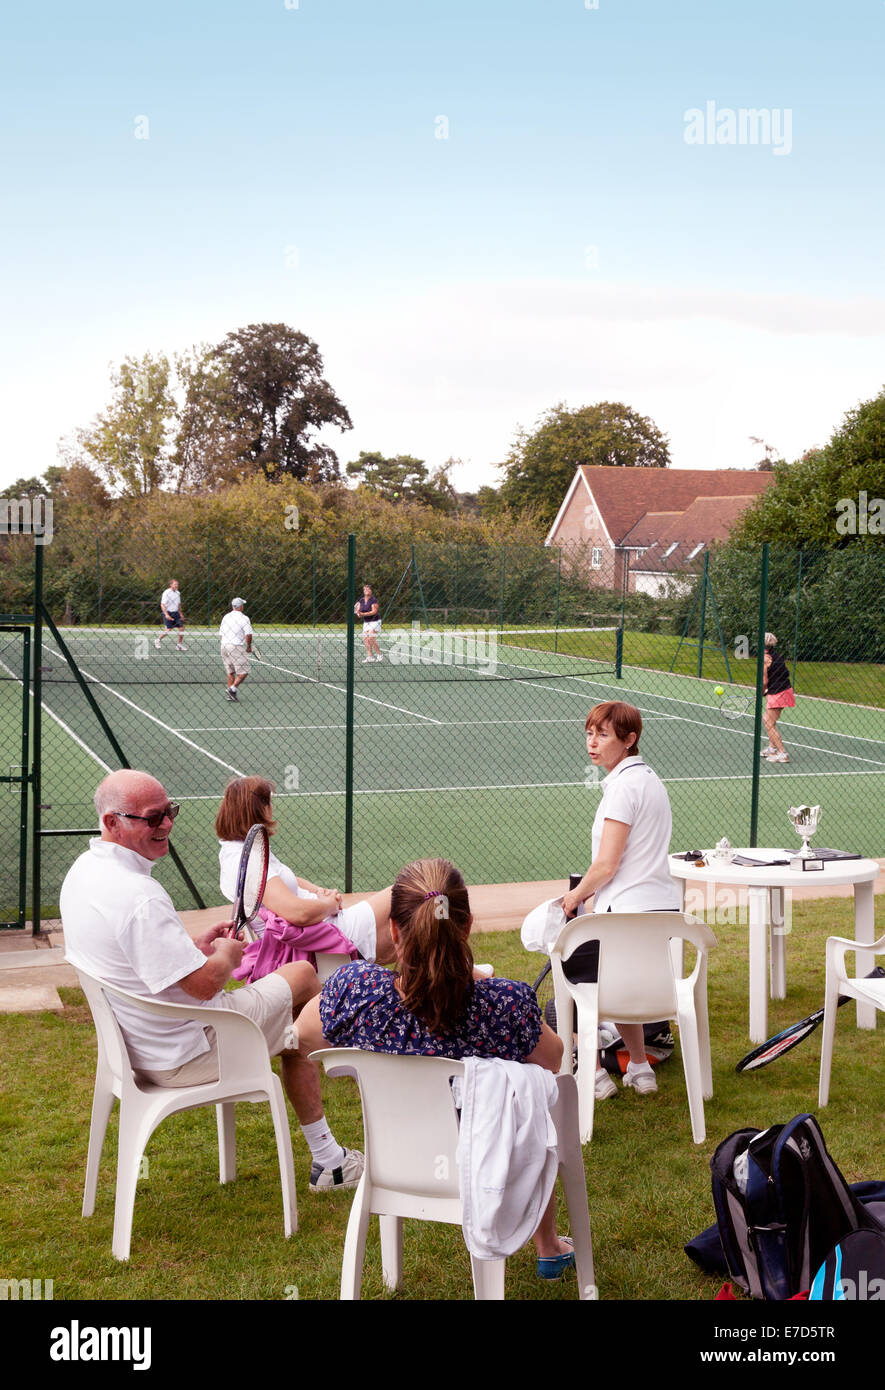 People enjoying an afternoon playing tennis at the URC Tennis Club, a local tennis club, Newmarket, Suffolk, England UK Stock Photo